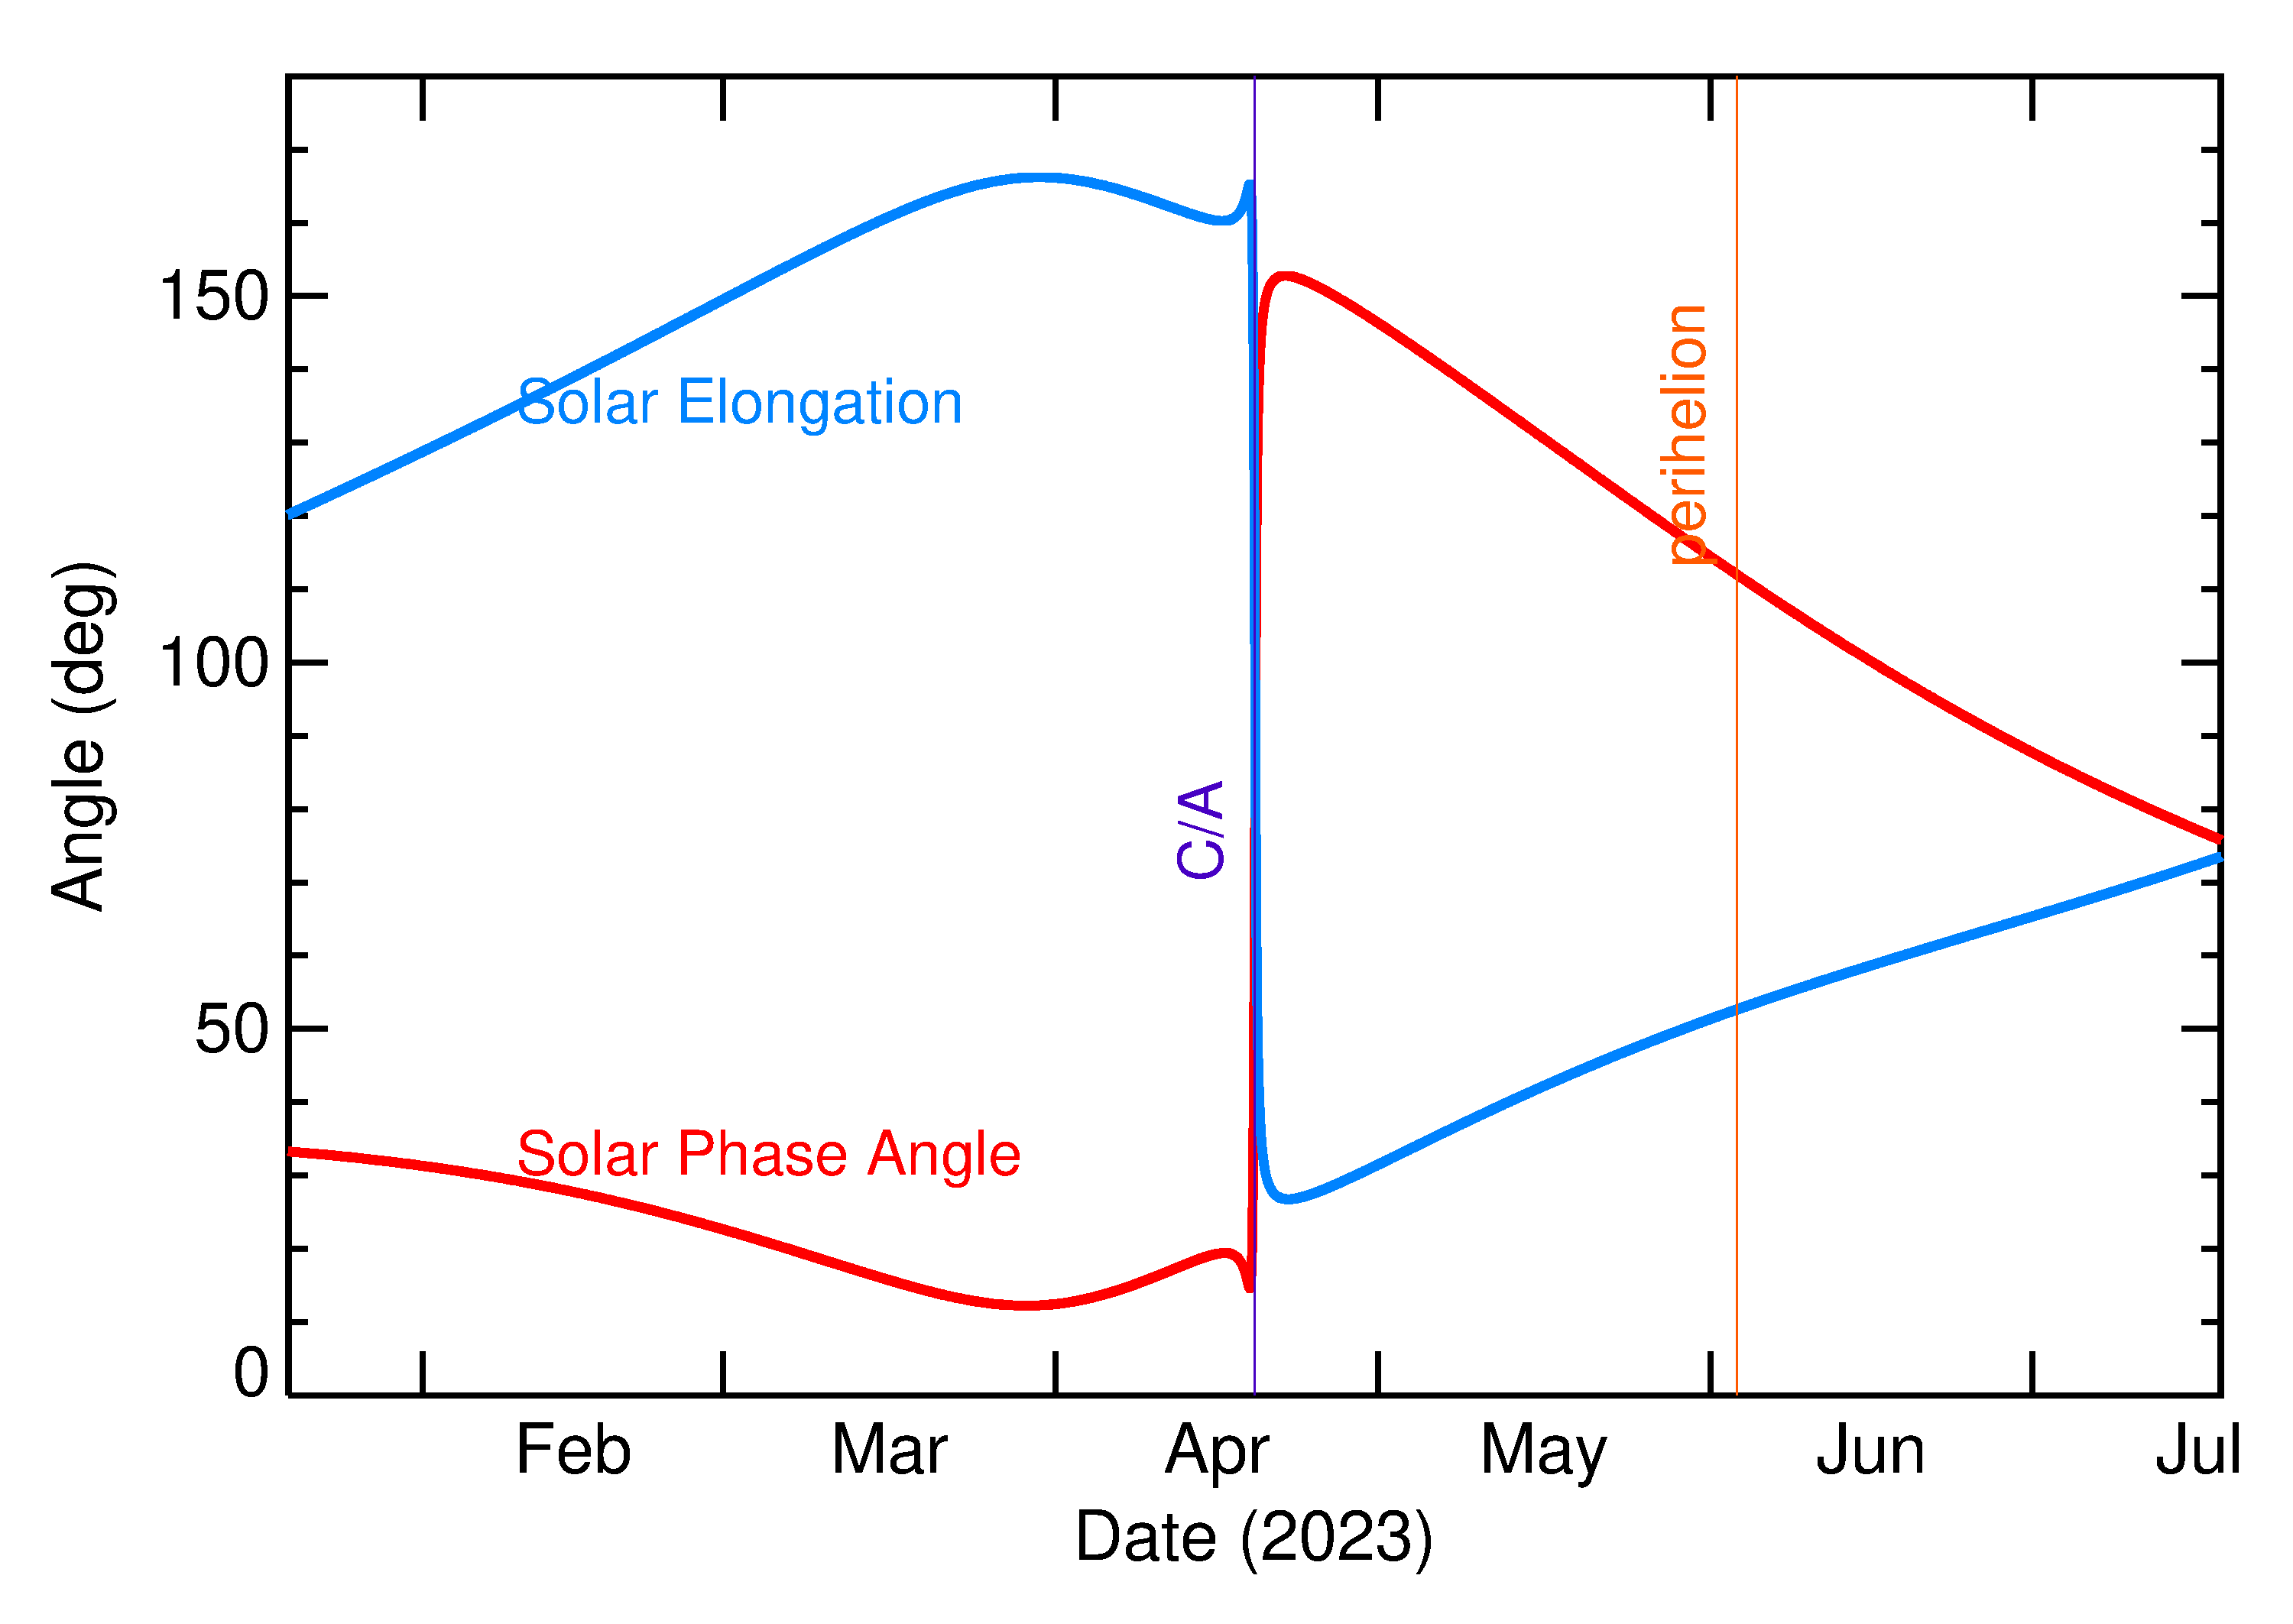 Solar Elongation and Solar Phase Angle of 2023 HH in the months around closest approach